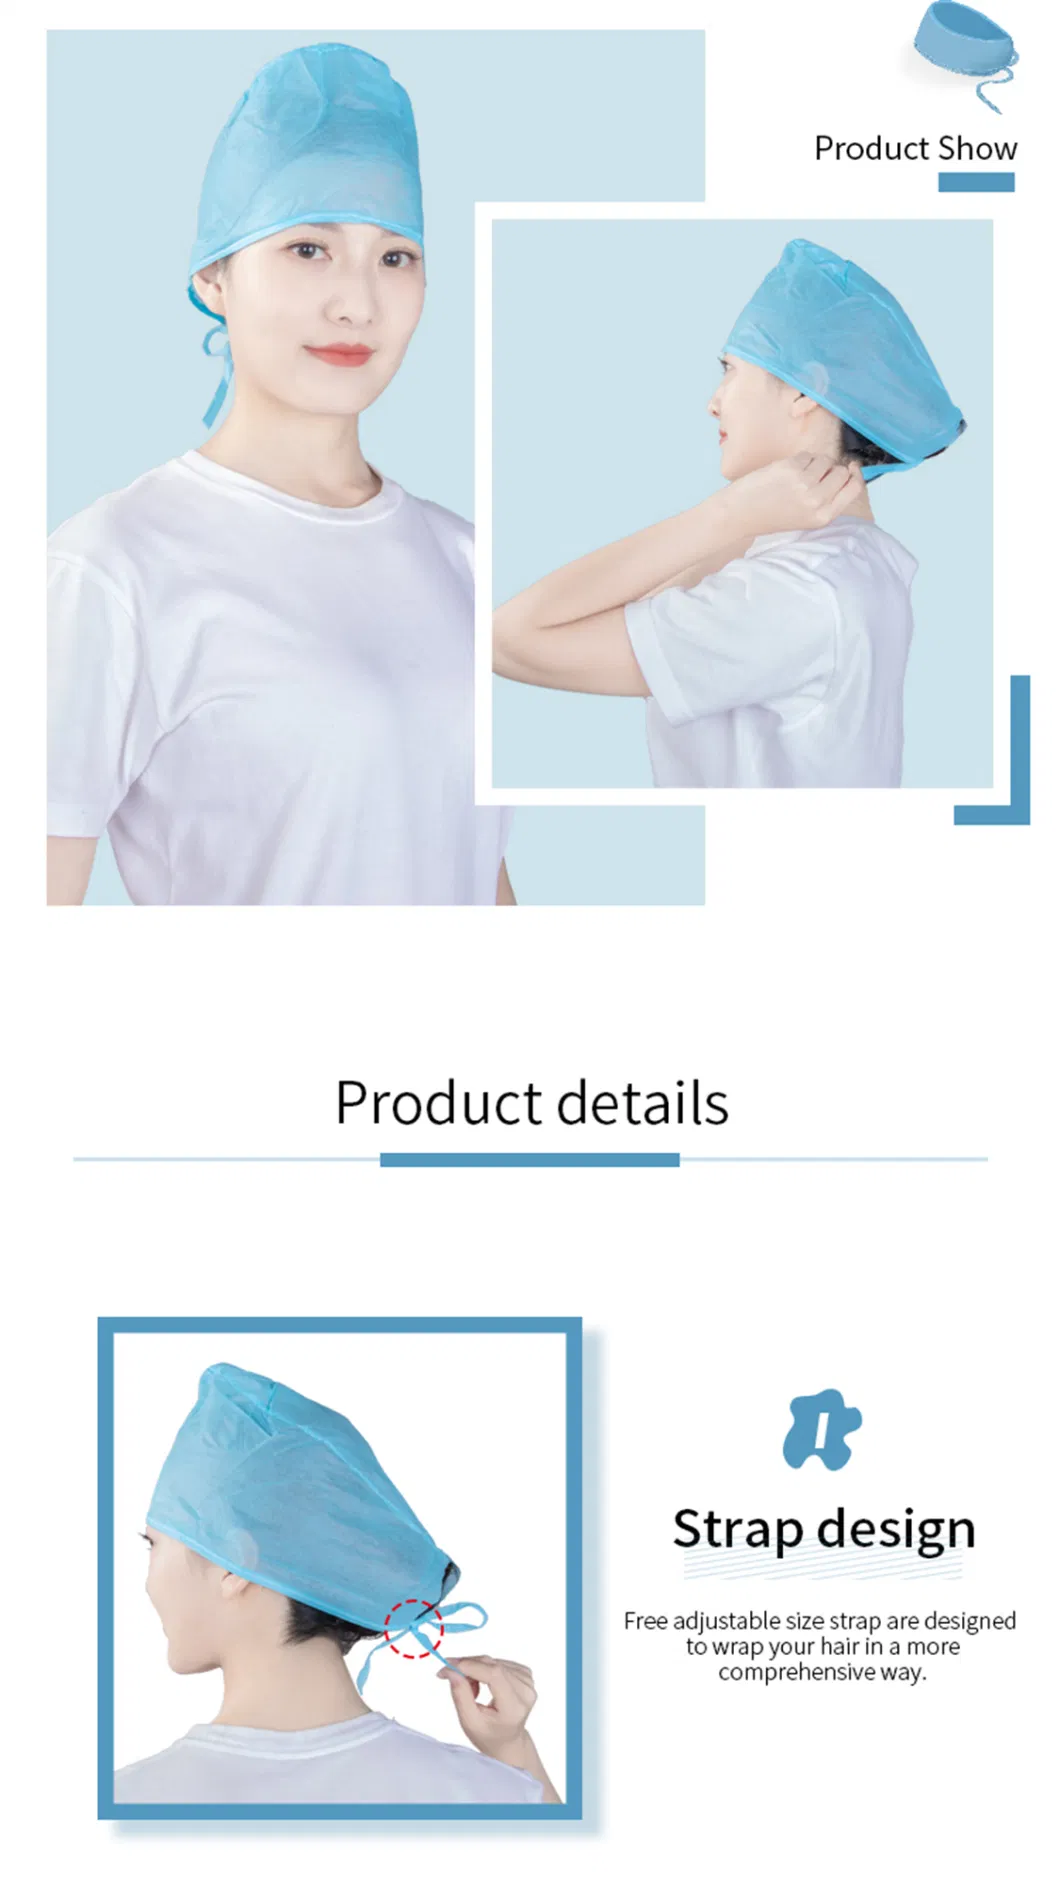 Disposable Use Nonwoven SMS Head Cover Surgical Doctor/Nurse Caps with Ties